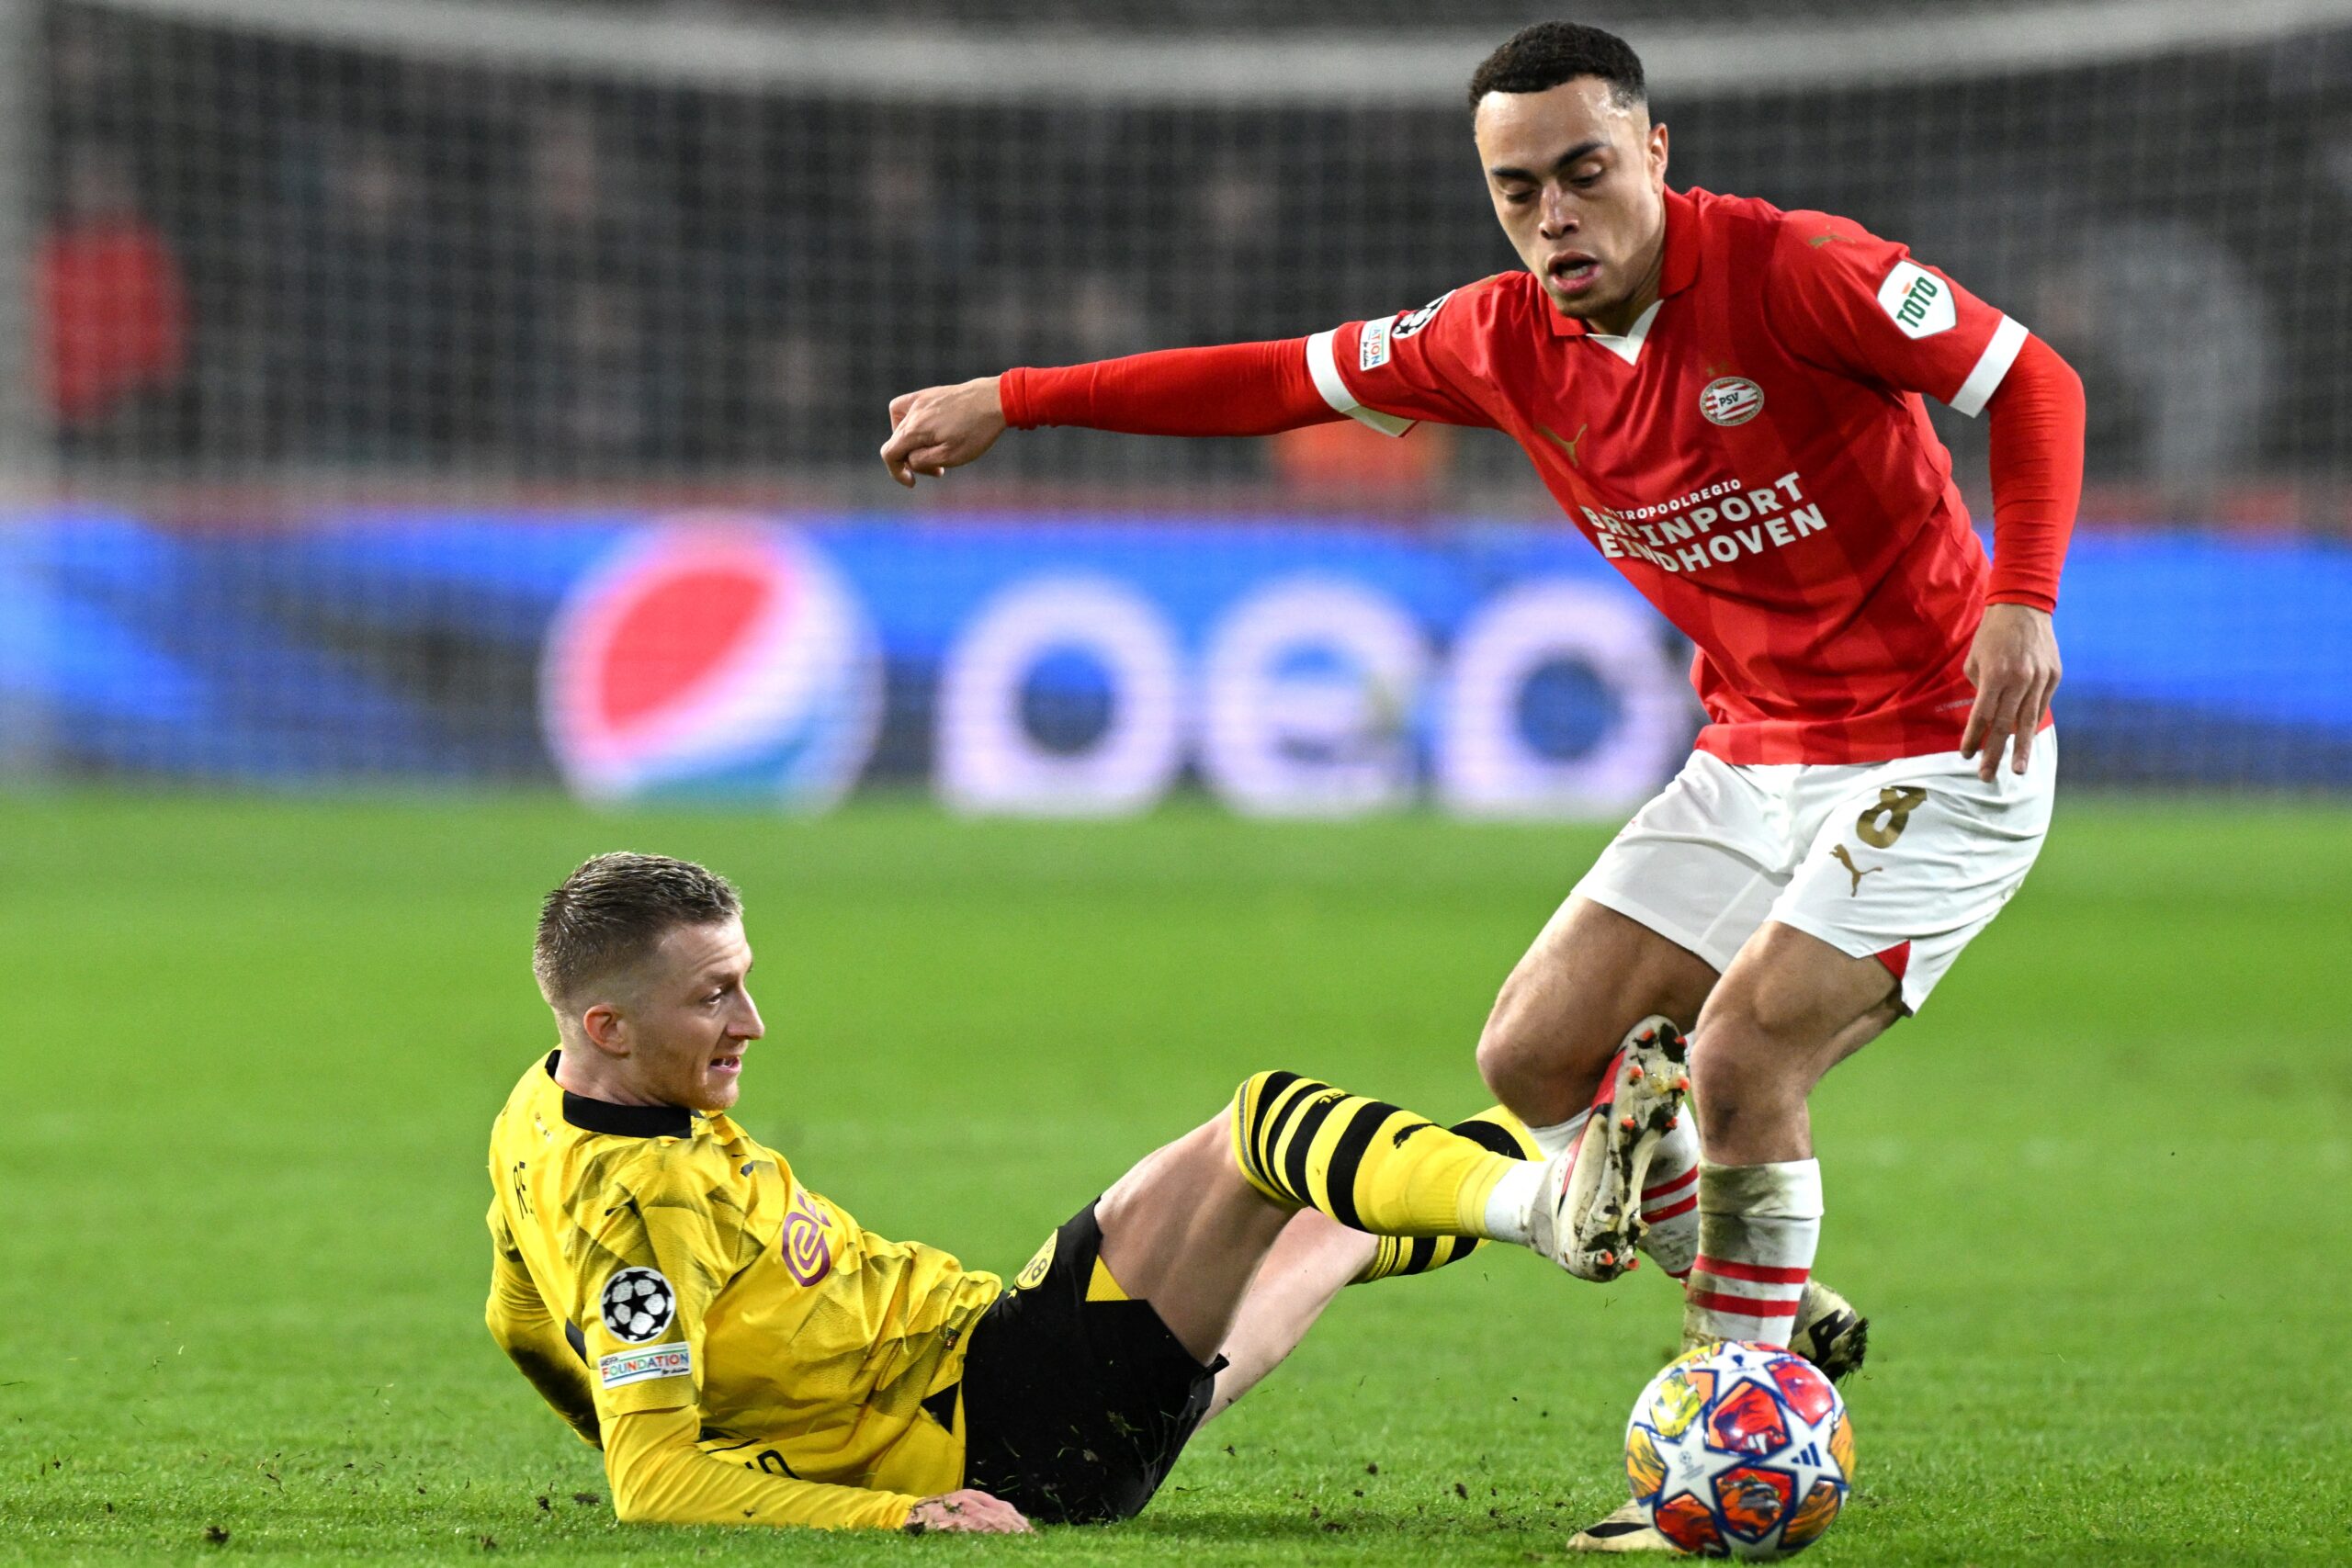 Dortmund's German forward #11 Marco Reus (L) and PSV's US midfielder #08 Sergino Dest fight for the ball during the UEFA Champions League round of 16, first leg football match between against PSV Eindhoven and Borussia Dortmund at the The Philips Stadium, in Eindhoven on February 20, 2024.